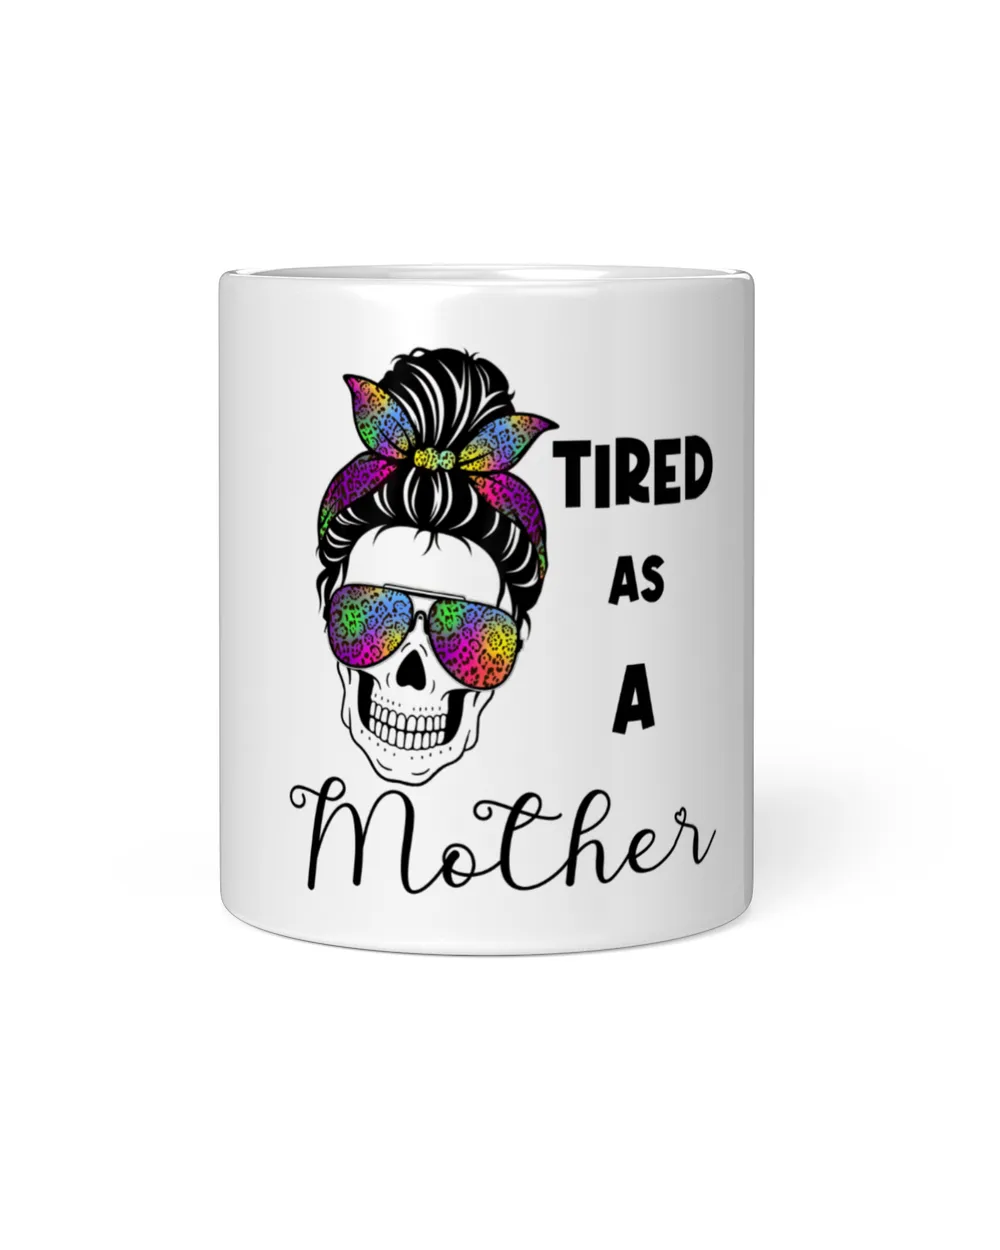 RD Tired as a Mother Shirt, Mothers Day Gift, Mom Shirts, Gift for Mom, Mom Birthday Gift, Mom Life Shirt